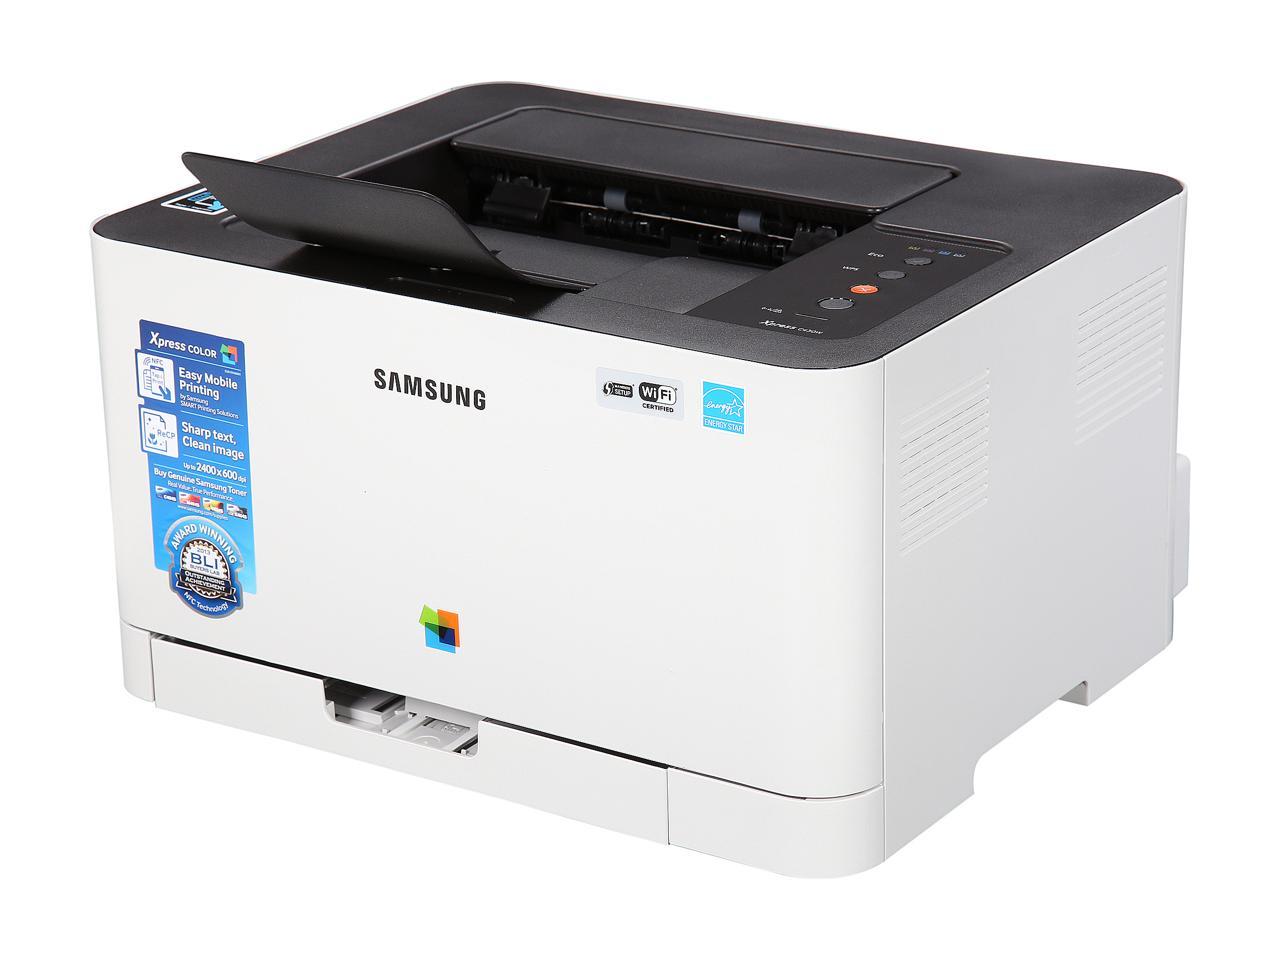 SS230G Samsung Xpress C430W Wireless Color Laser Printer with Simple NFC WiFi Connectivity and Built-in Ethernet Dash Replenishment Enabled 